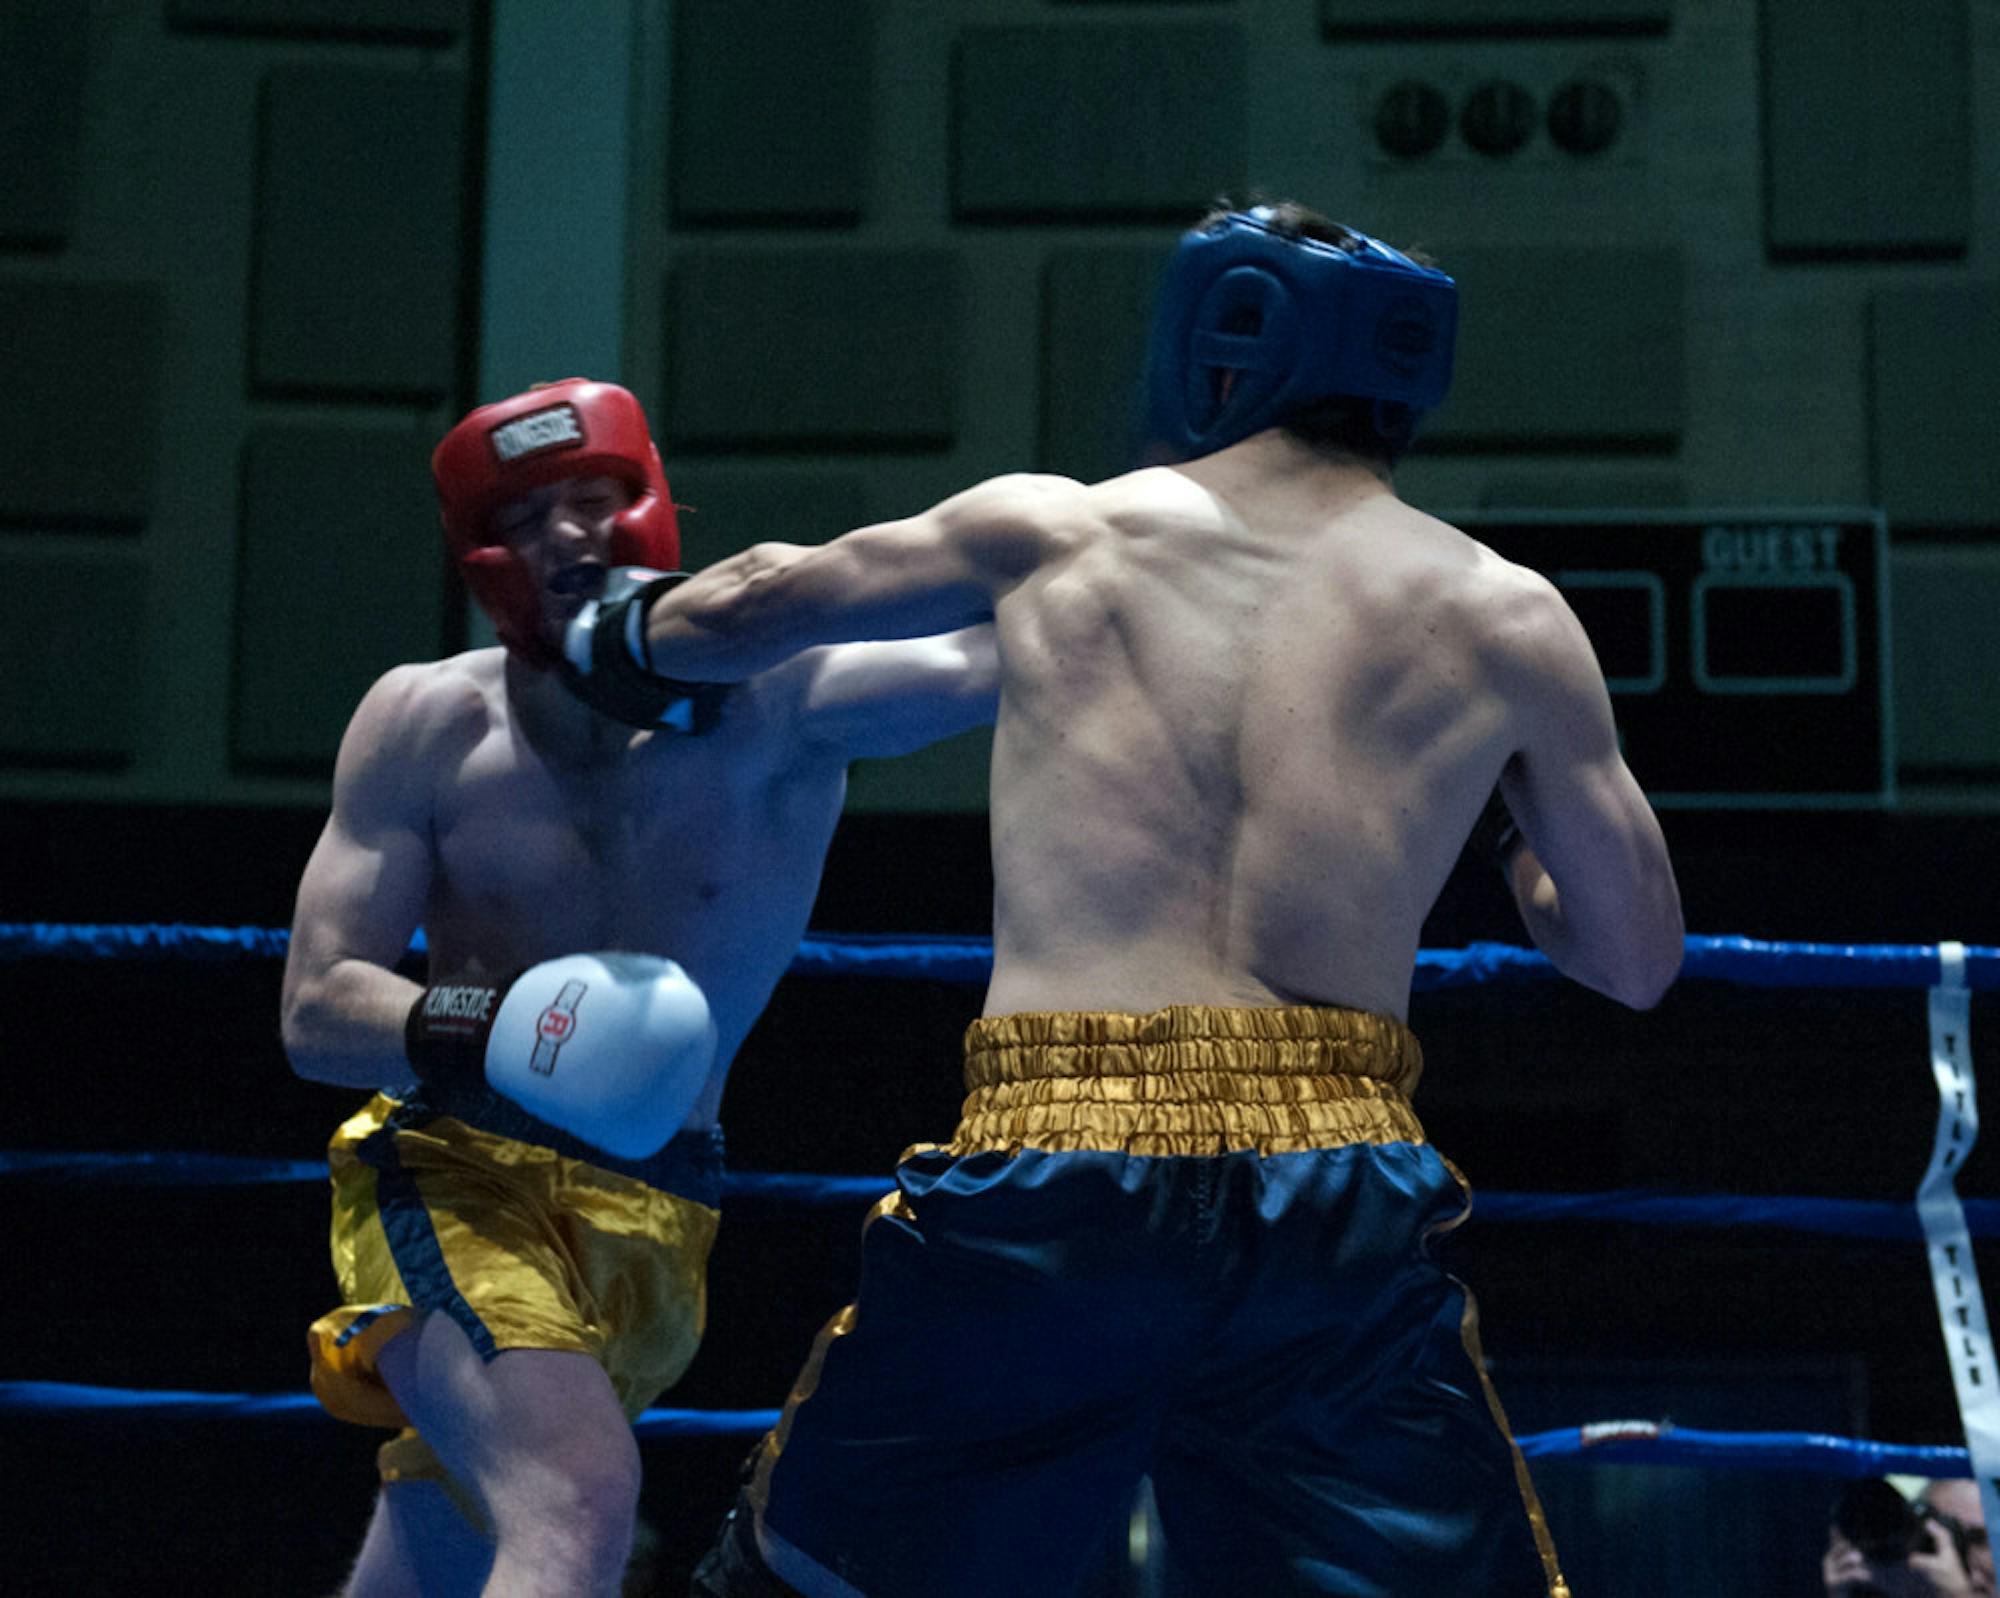 Bengal Bouts president Evan Escobedo, right, fights freshman Pat Gordon during the Bengal Bouts semifinals at Joyce Fieldhouse.